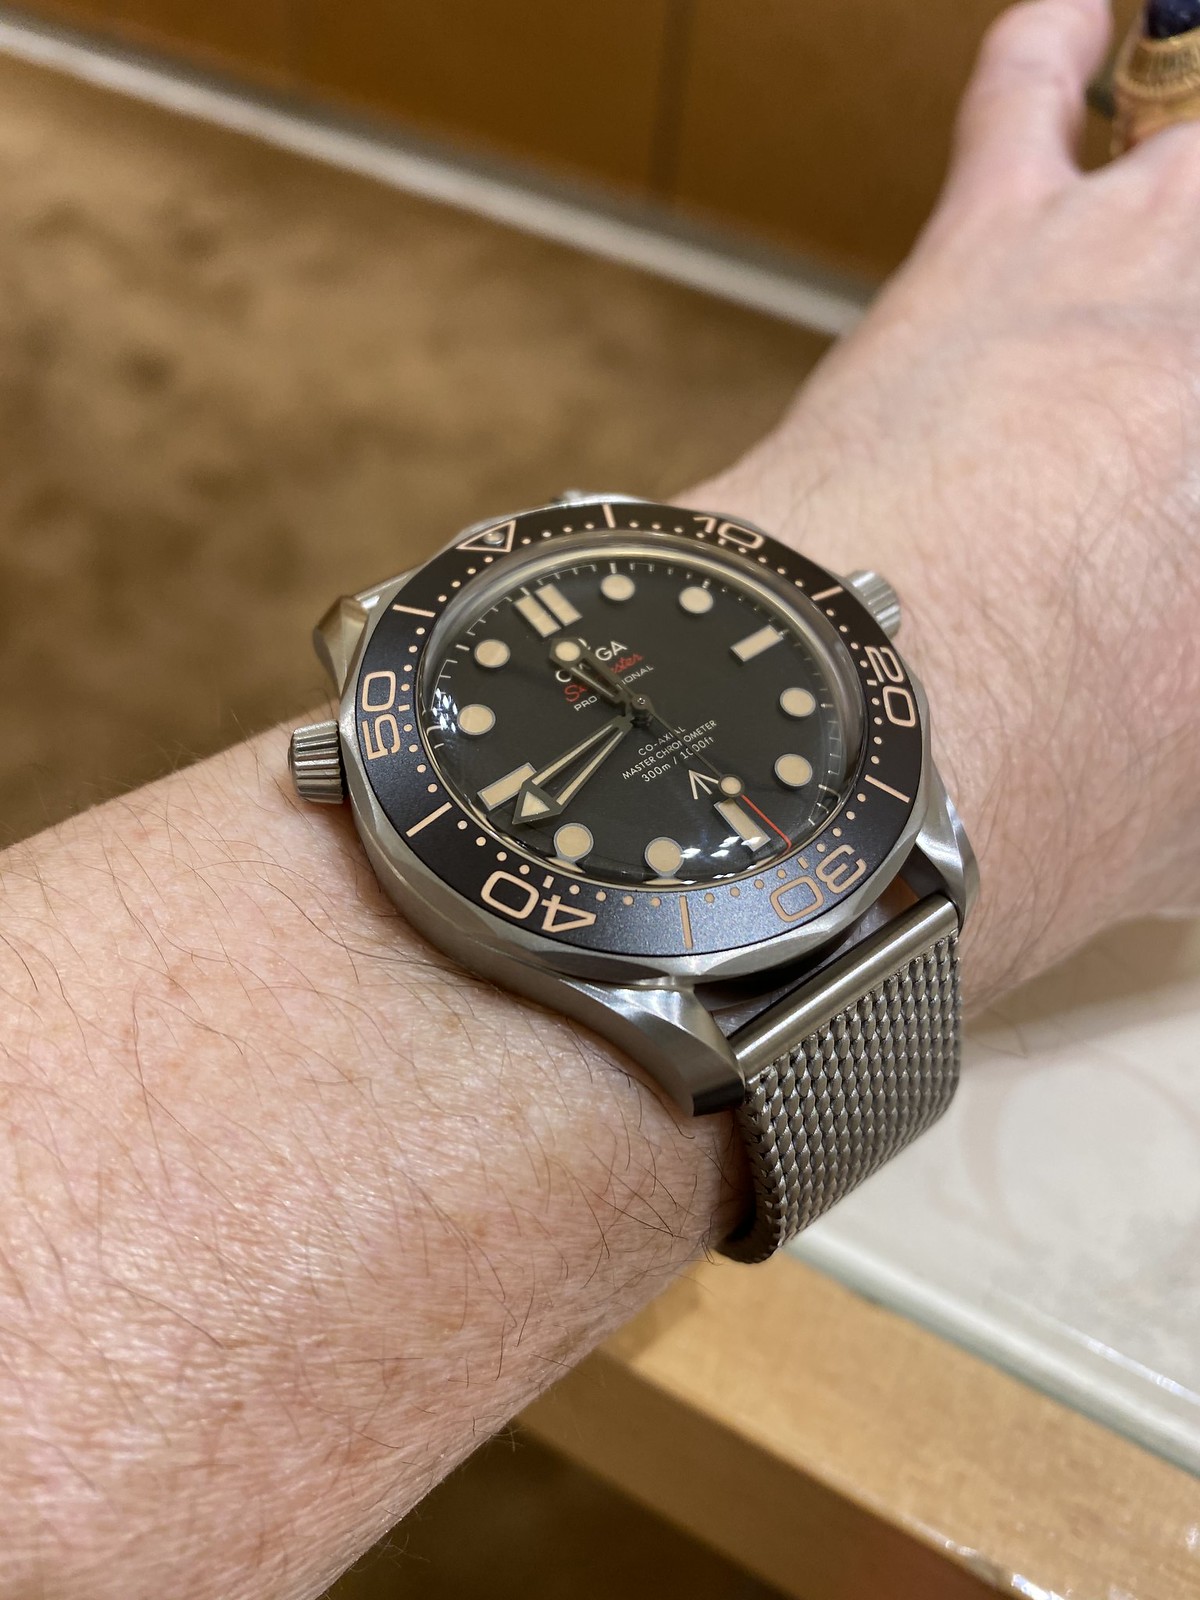 Some live shots of the Omega Seamaster 